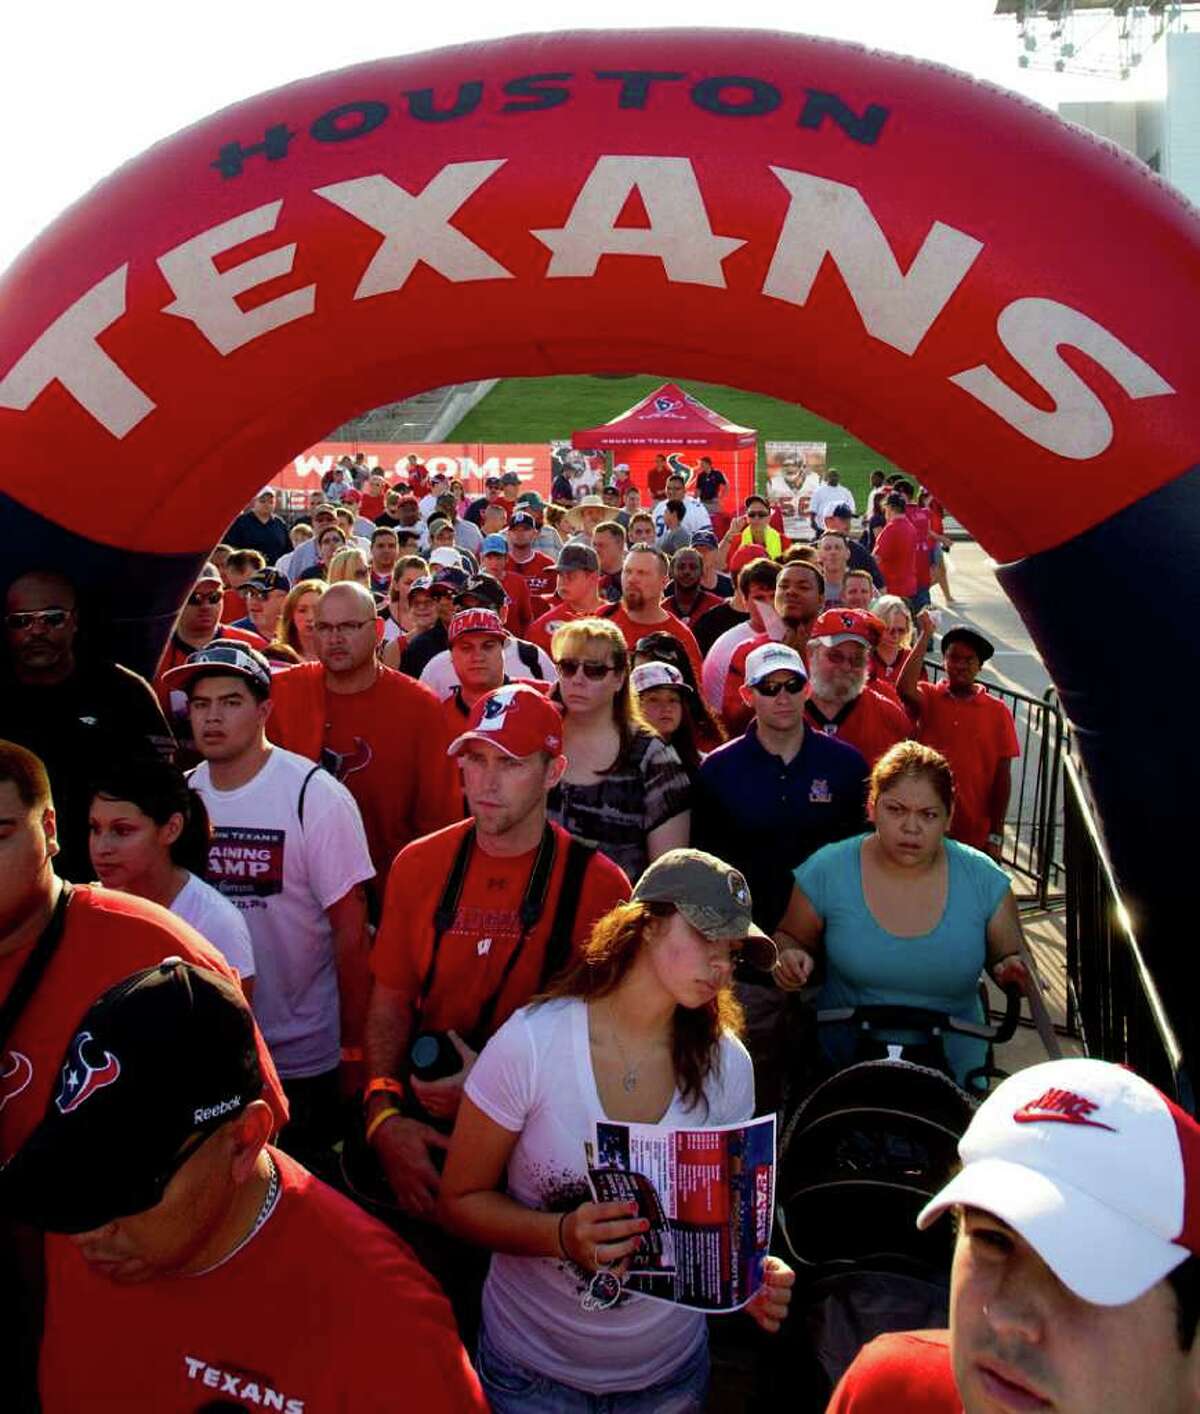 Houston Texans fans walk under an inflatable arch on their way to watch practice during an NFL football training camp Saturday, Aug. 6, 2011, in Houston.